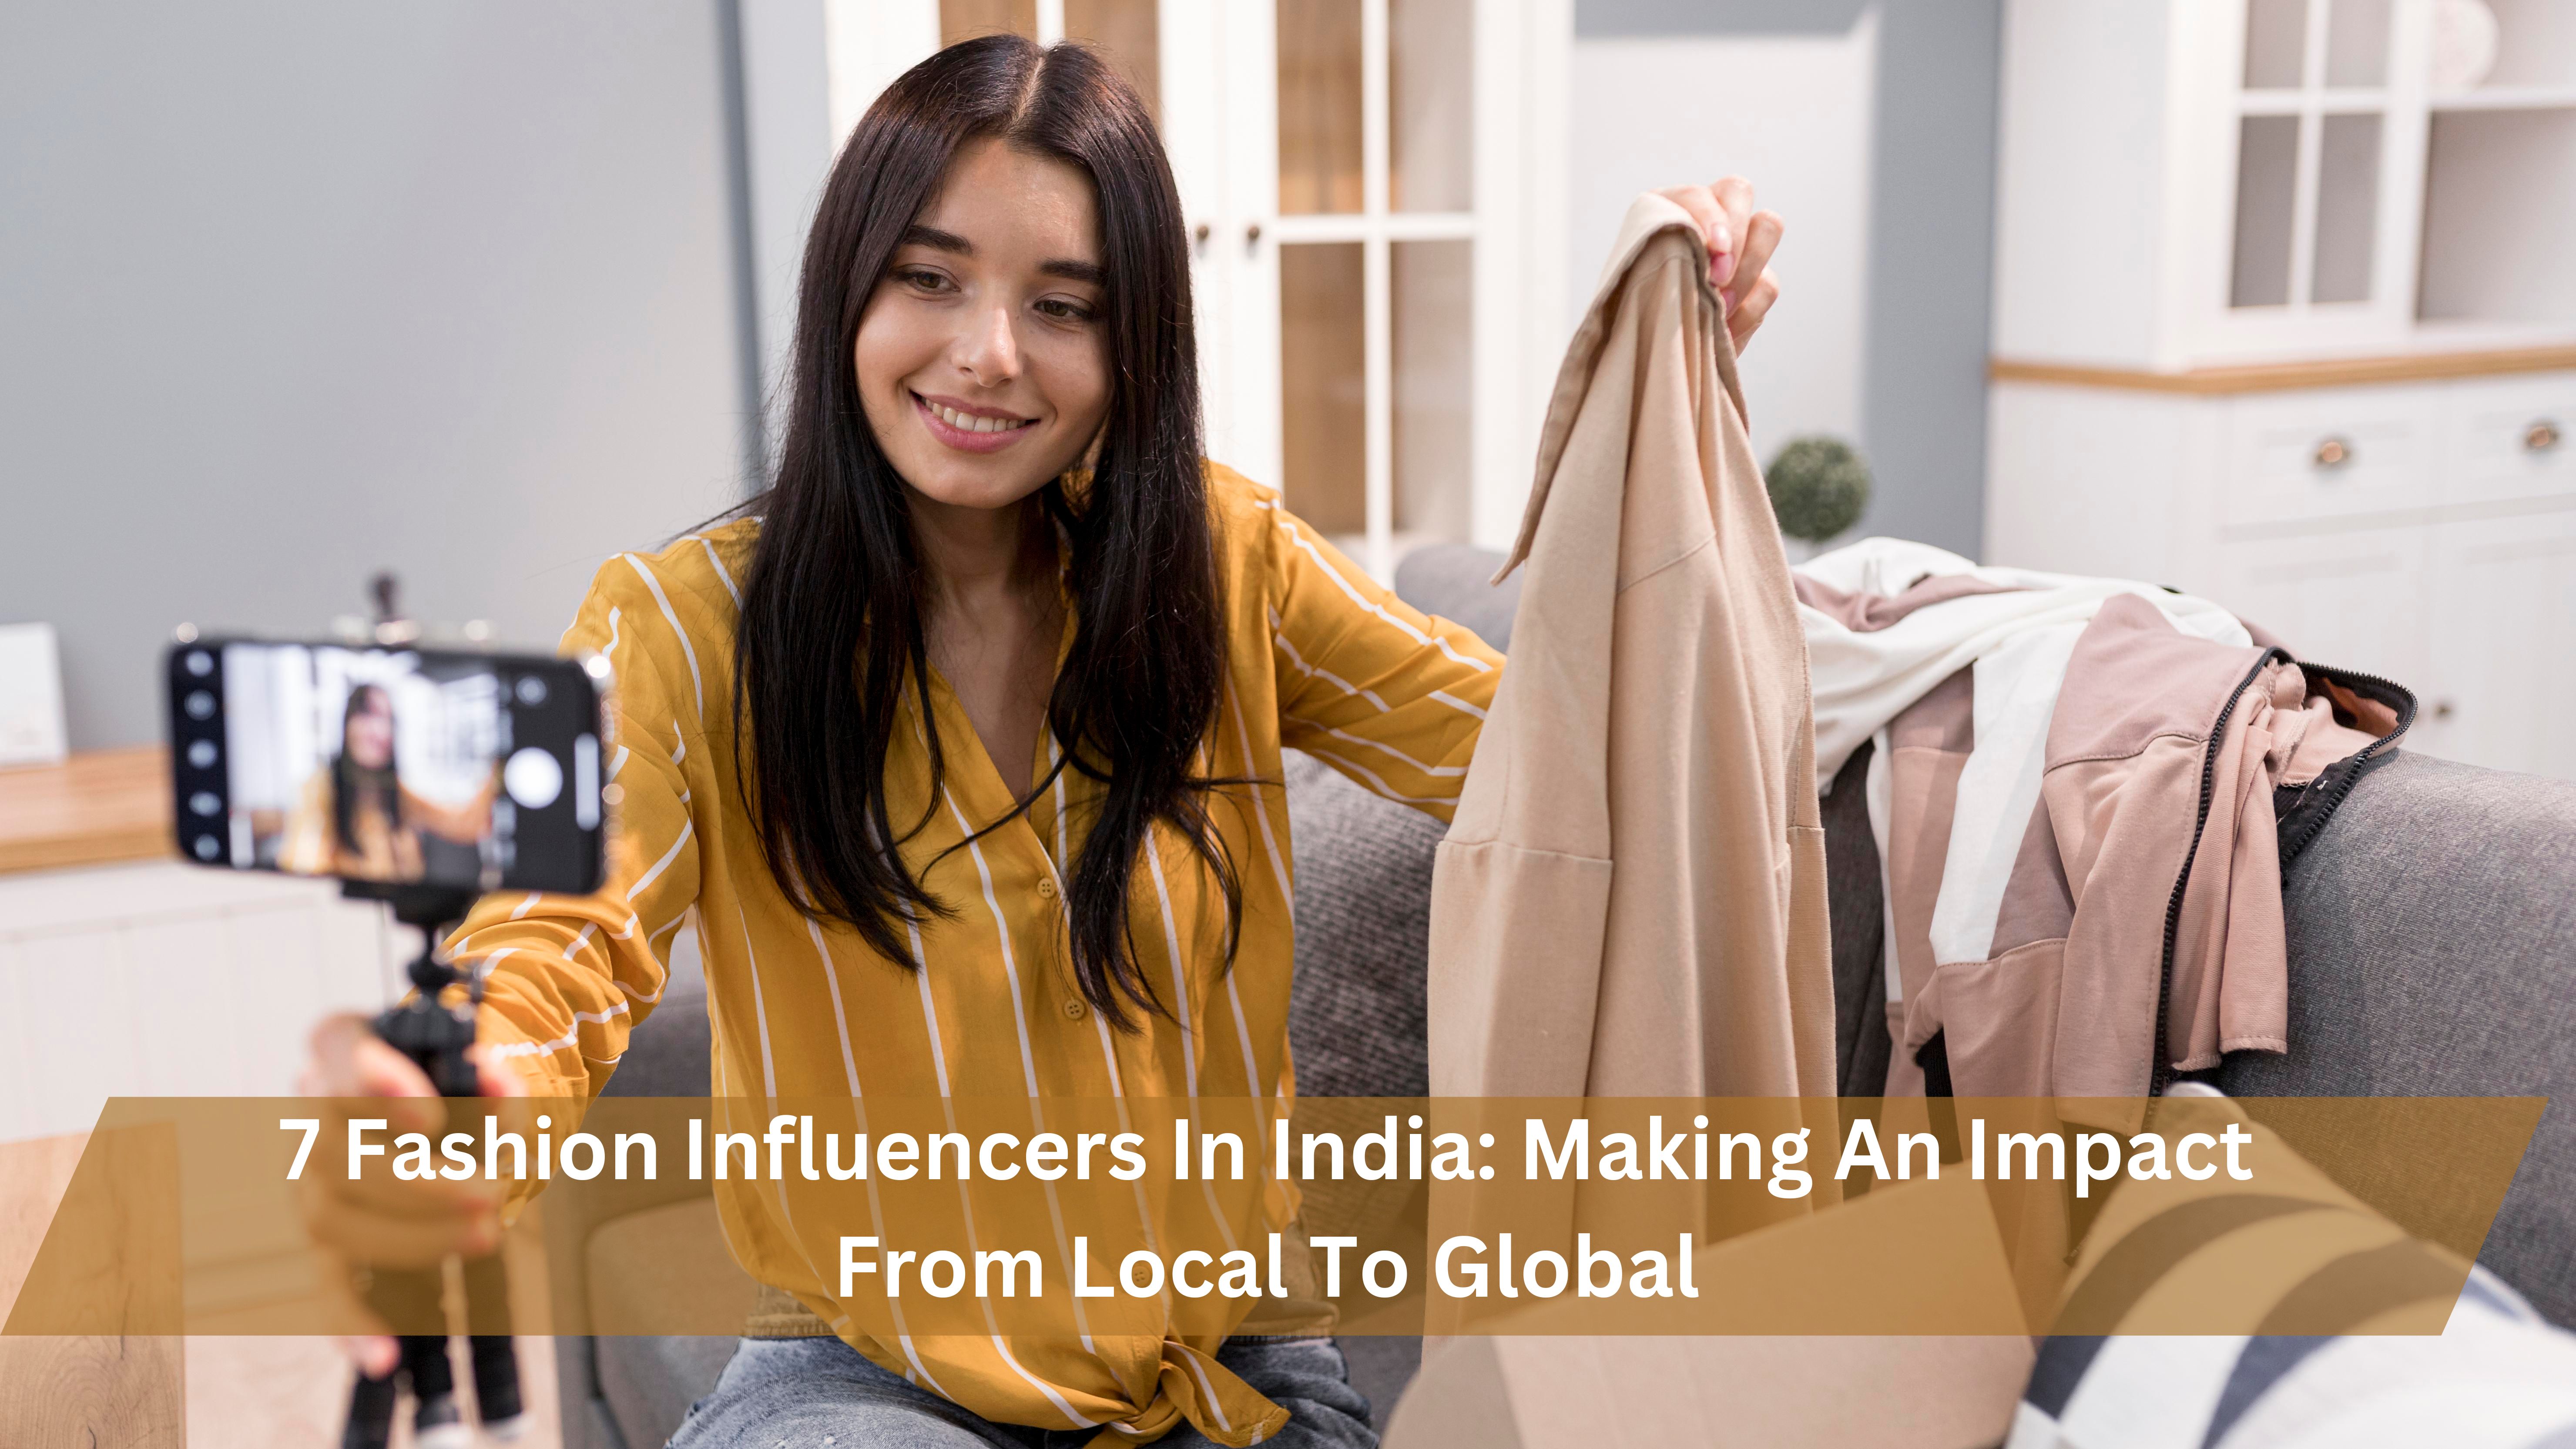 7 Fashion Influencers In India